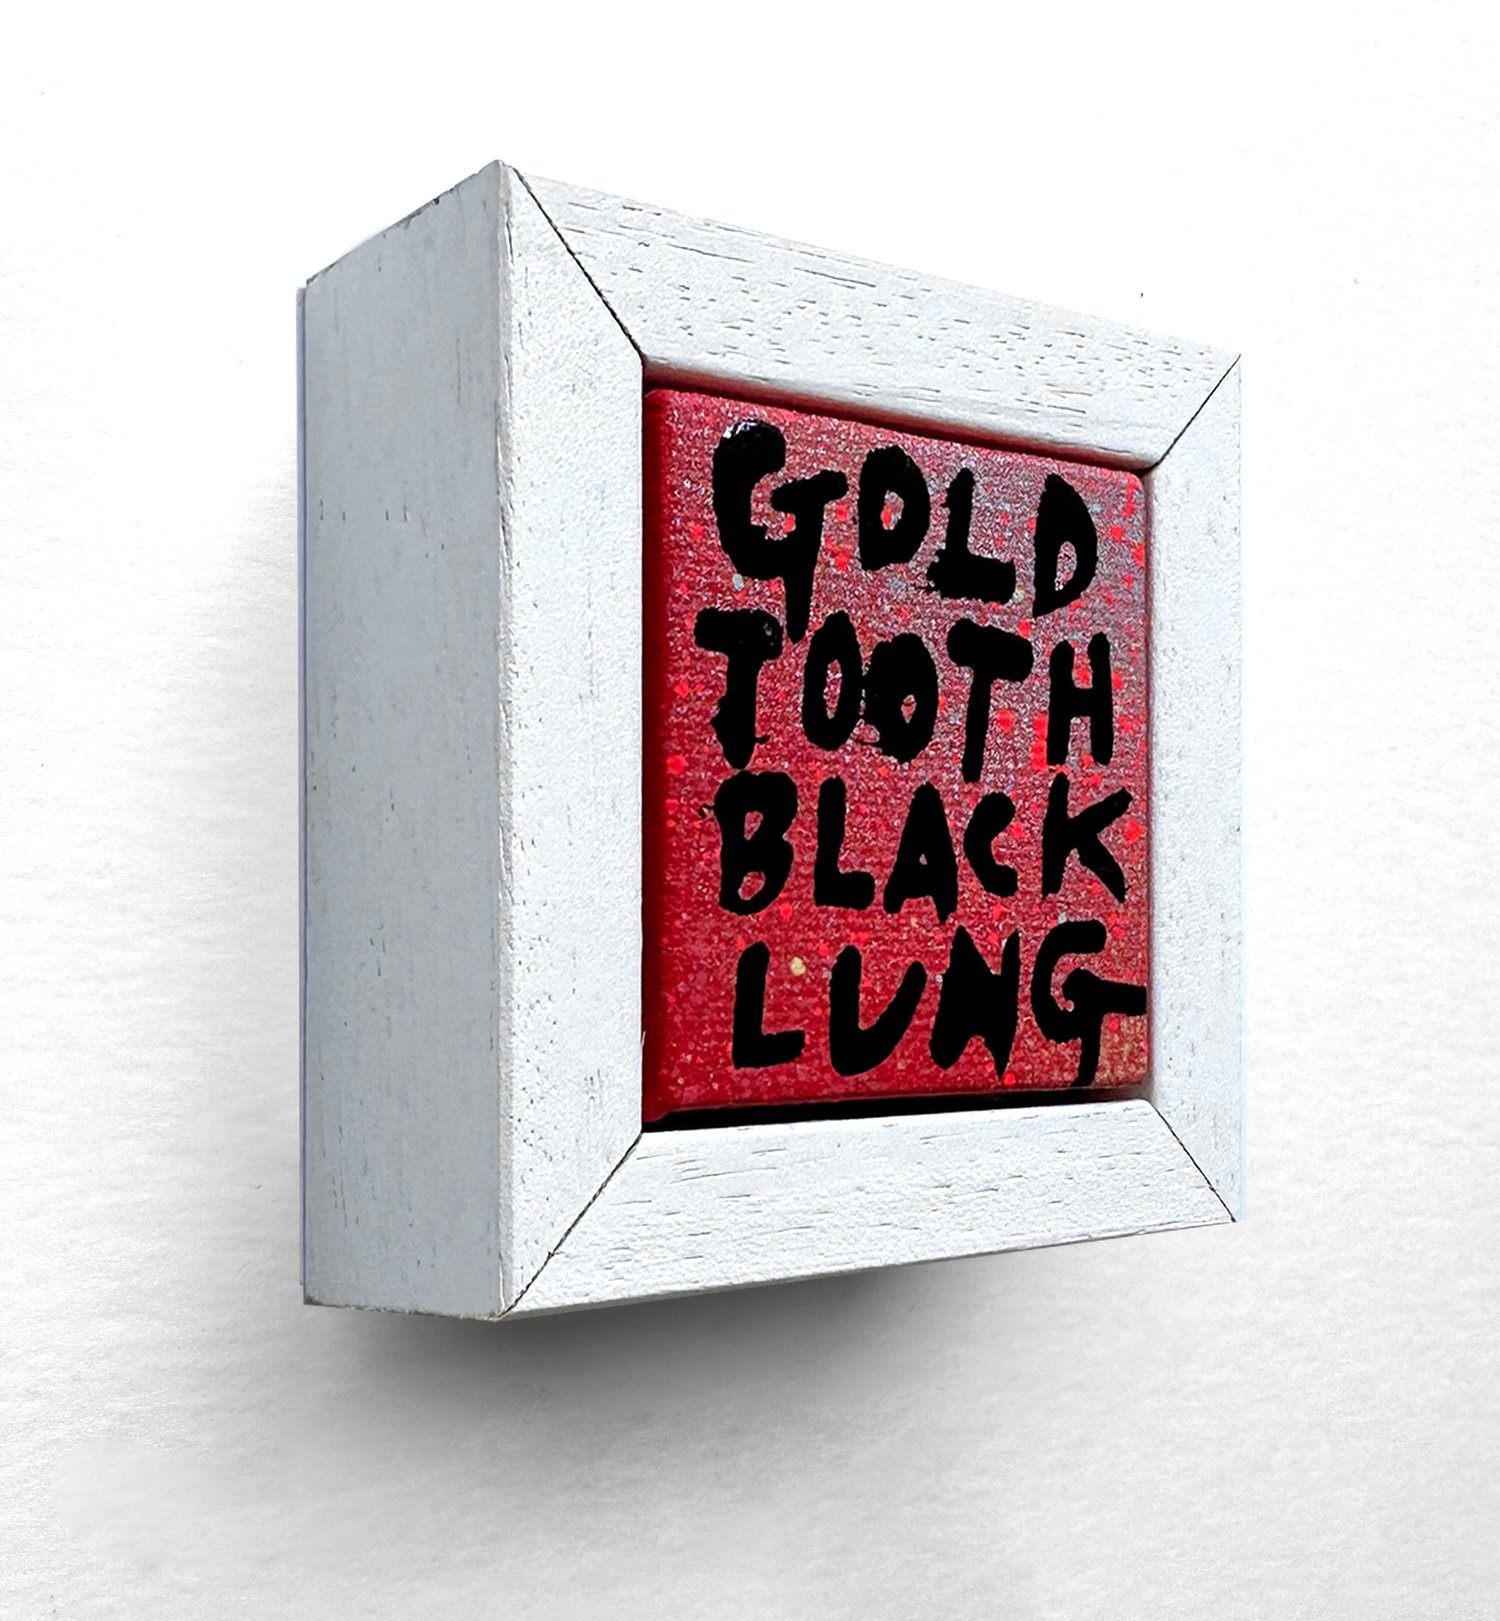 Image of ‘Gold Tooth Black Lung’ by EDWIN